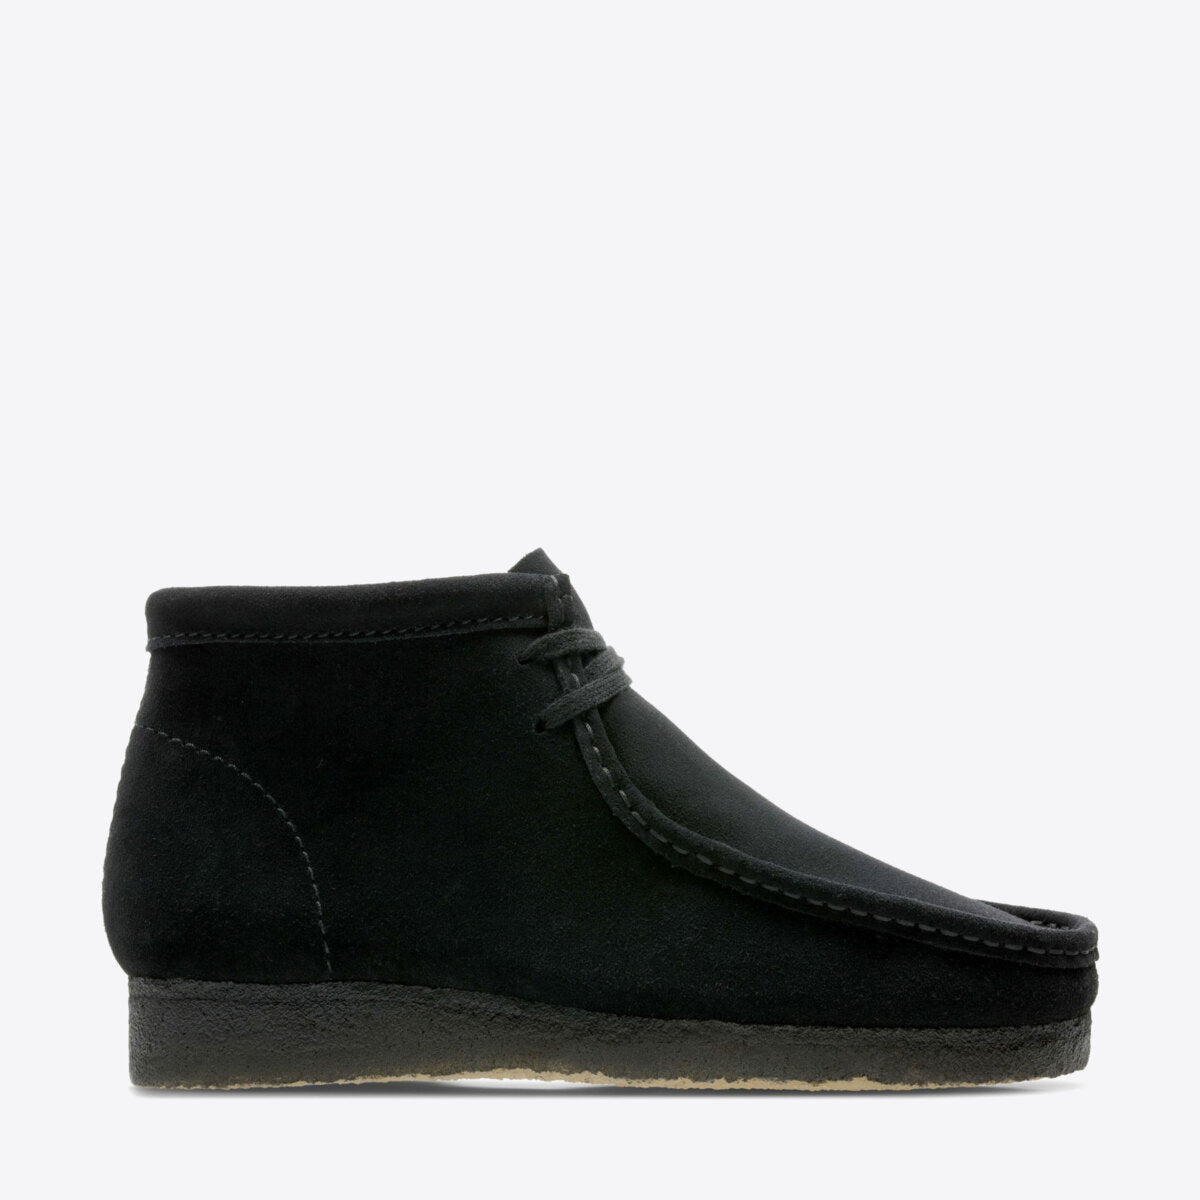 CLARKS Wallabee Boot Suede Black - Image 1